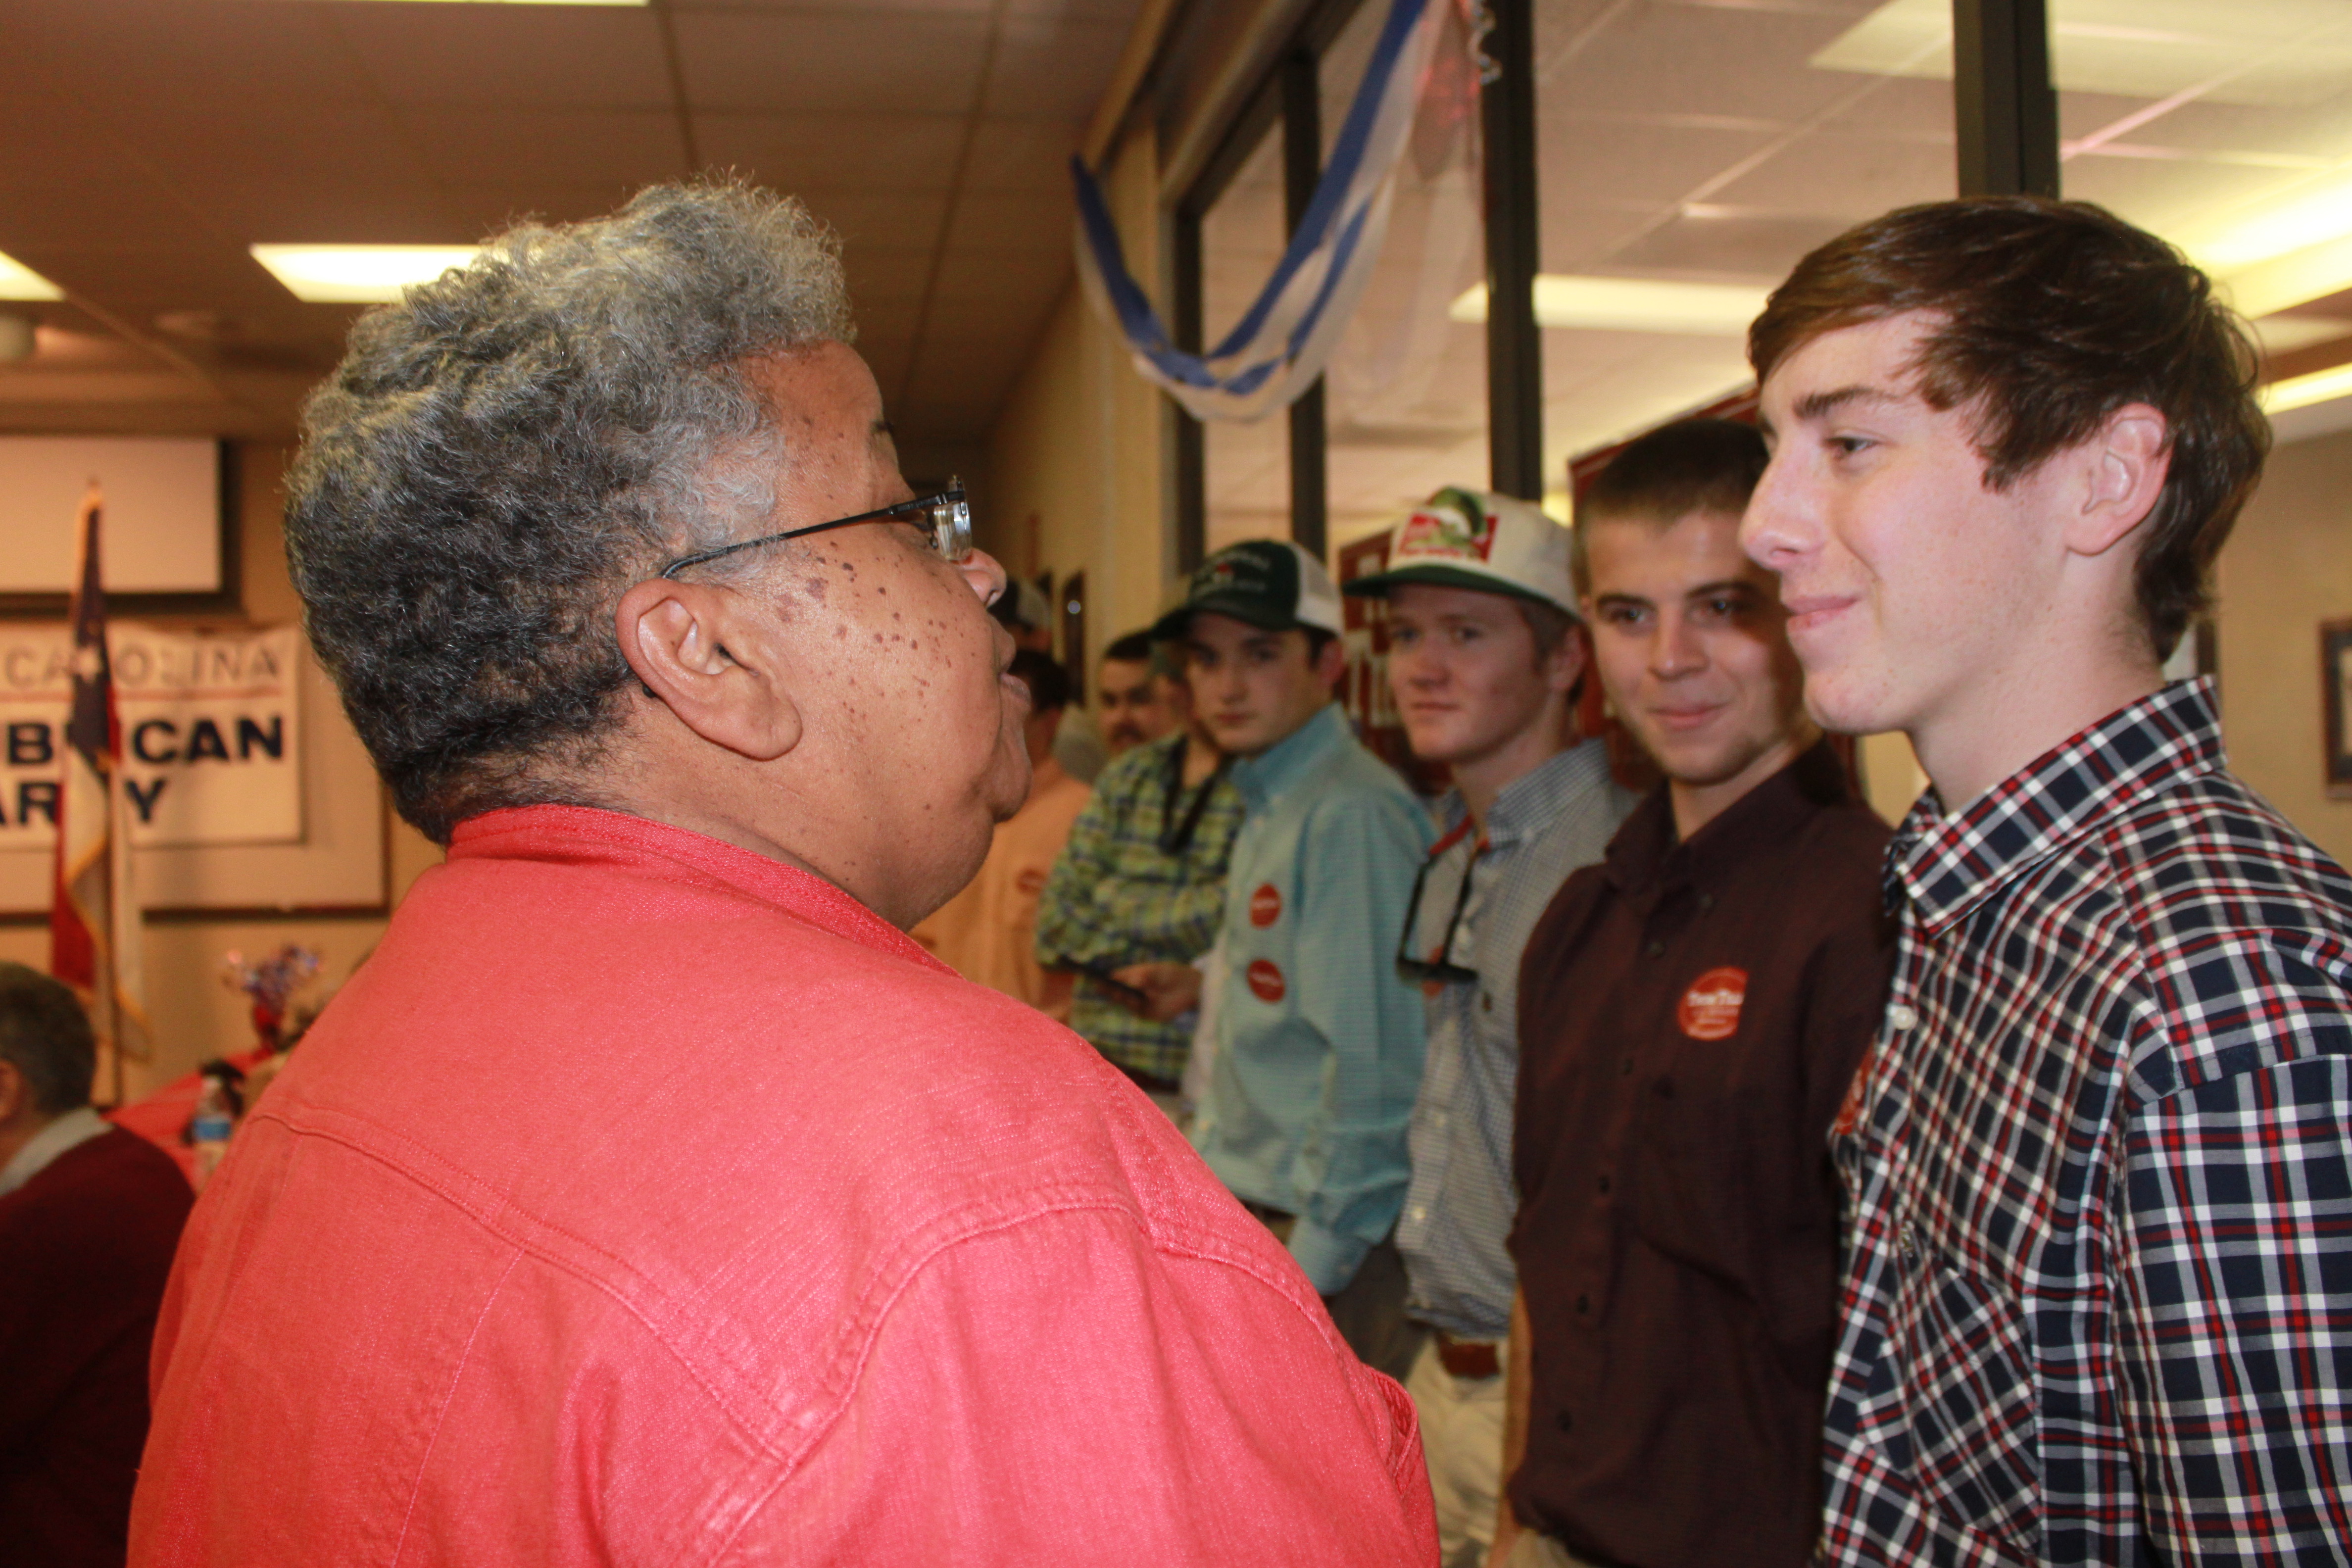 Ada Fisher, the Republican National committeewoman for North Carolina, tried to relate with college students. Photo: Josh Siegel/The Daily Signal